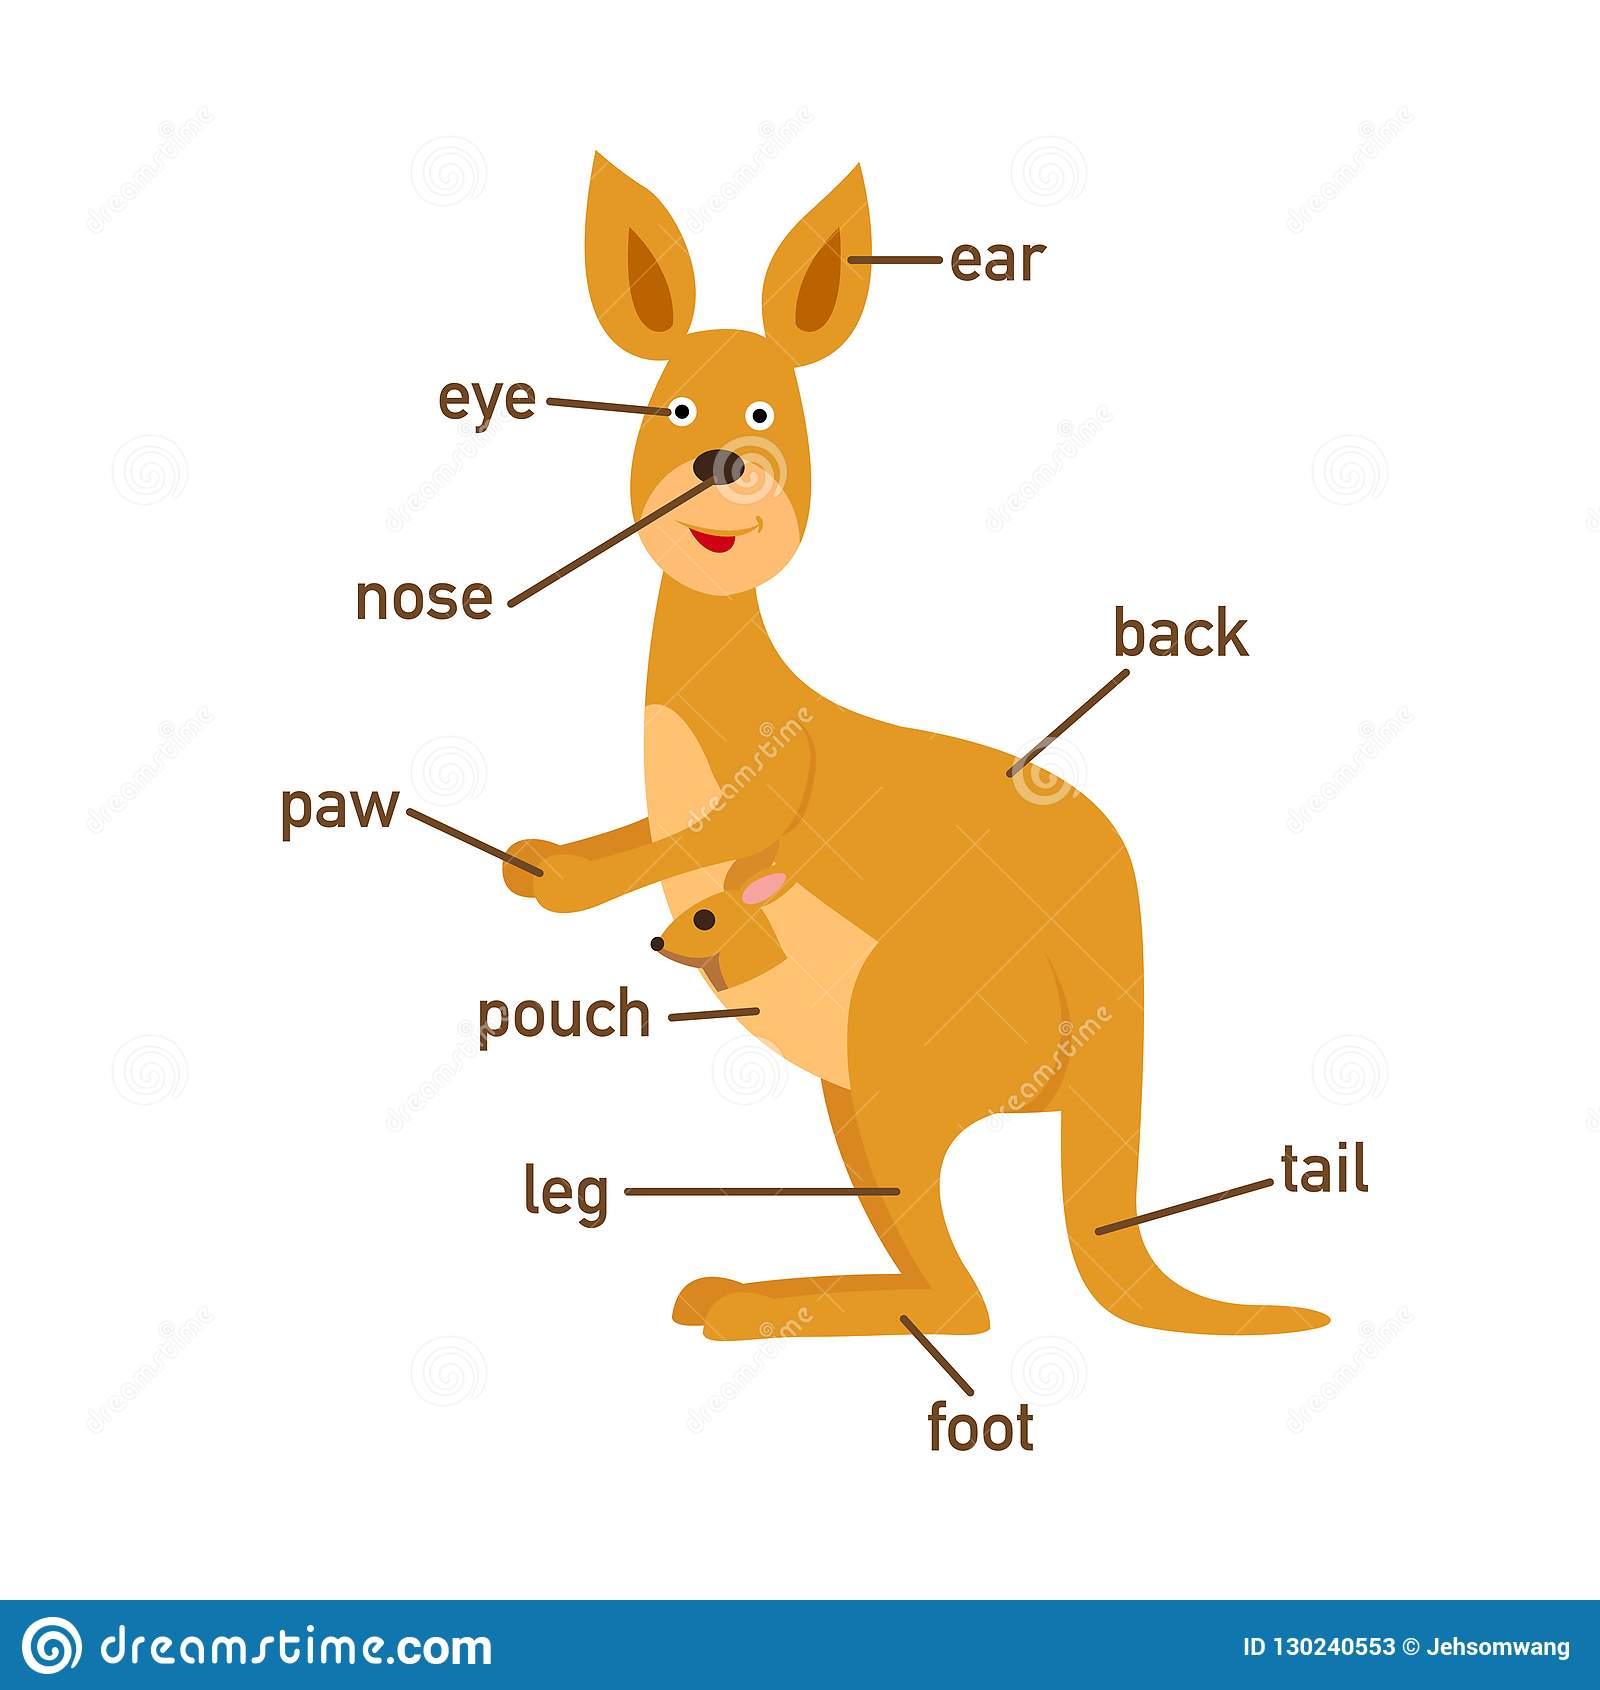 What is the body structure of a kangaroo?